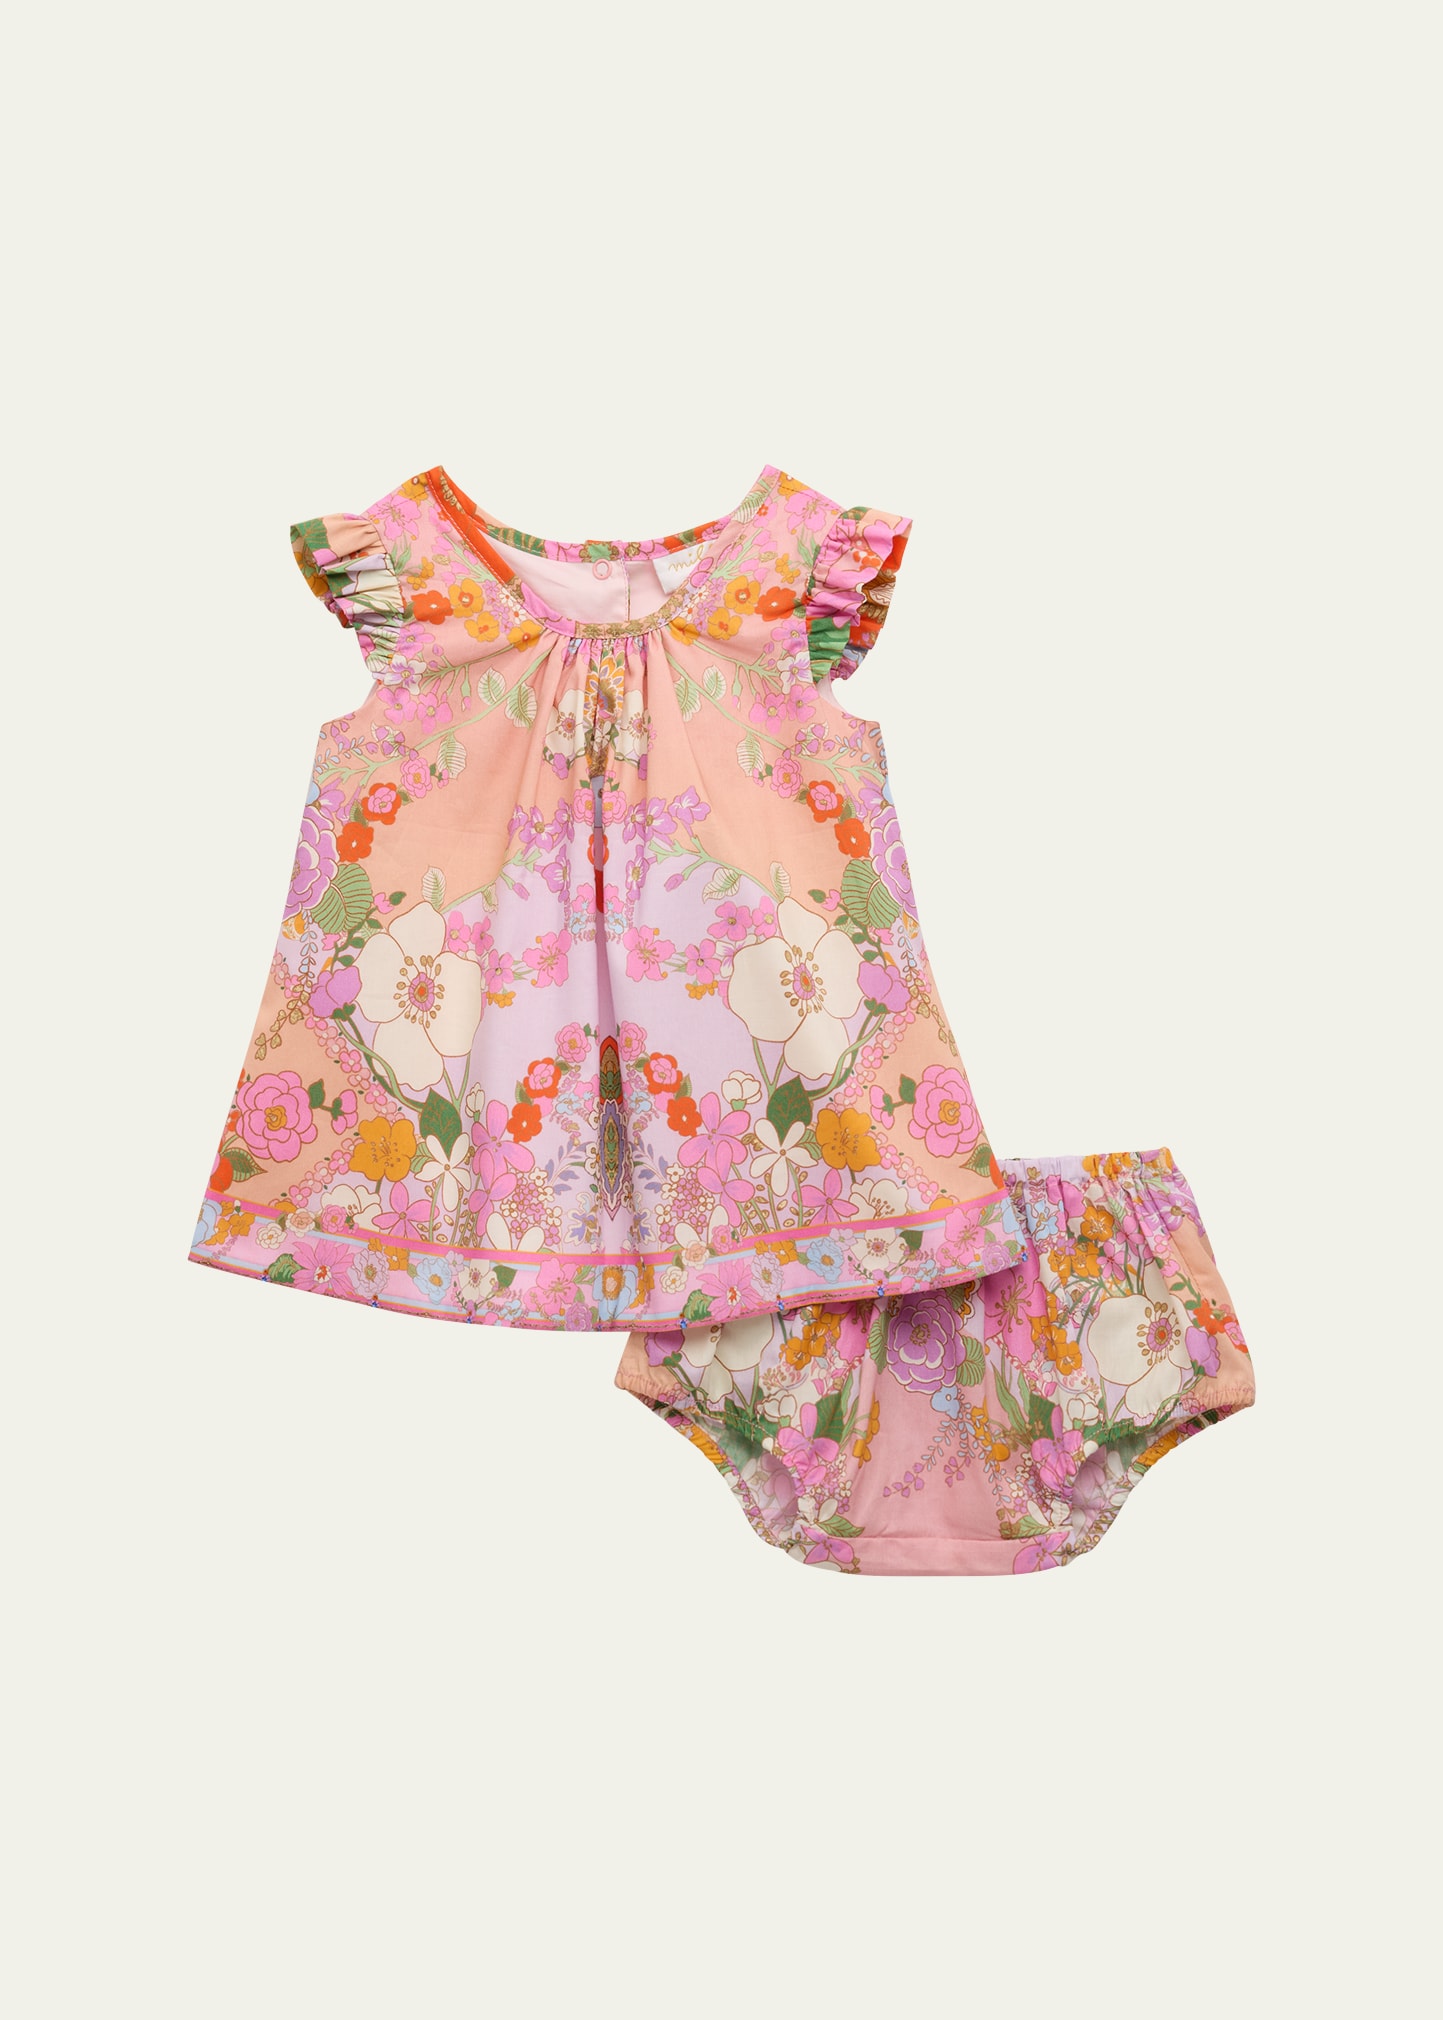 Shop Camilla Girl's Clever Clogs Top & Bloomer Set